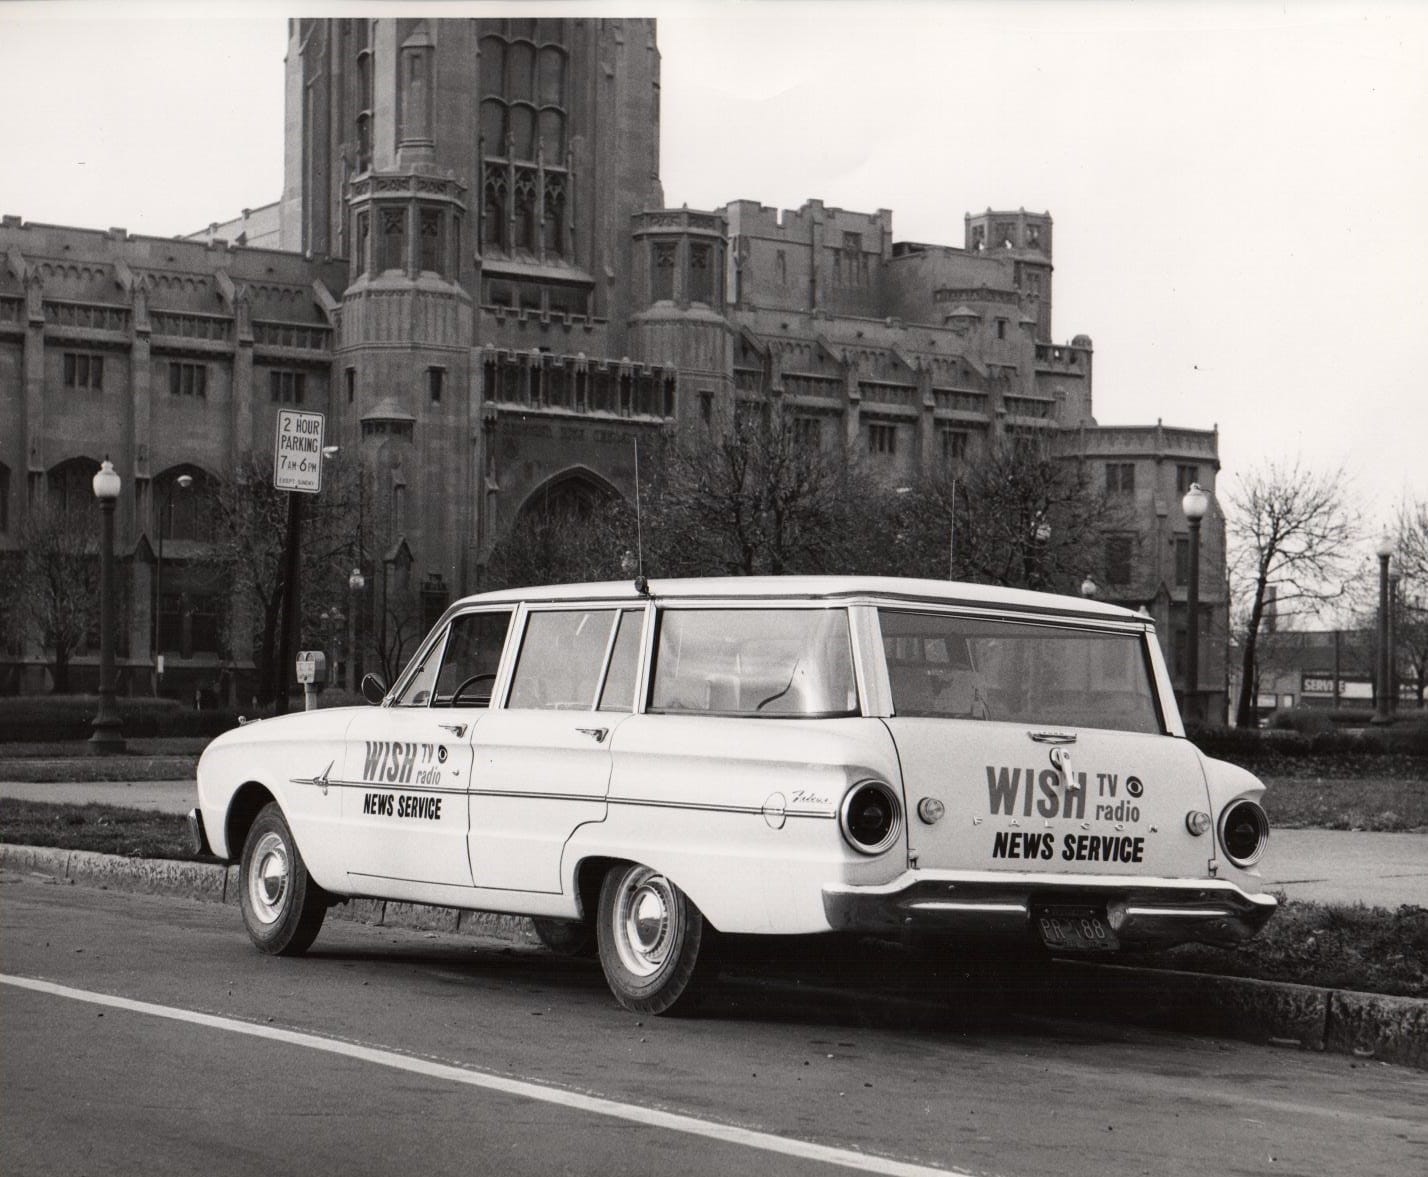 WISH reporters used this Ford Falcon station wagon in the early 1960s.